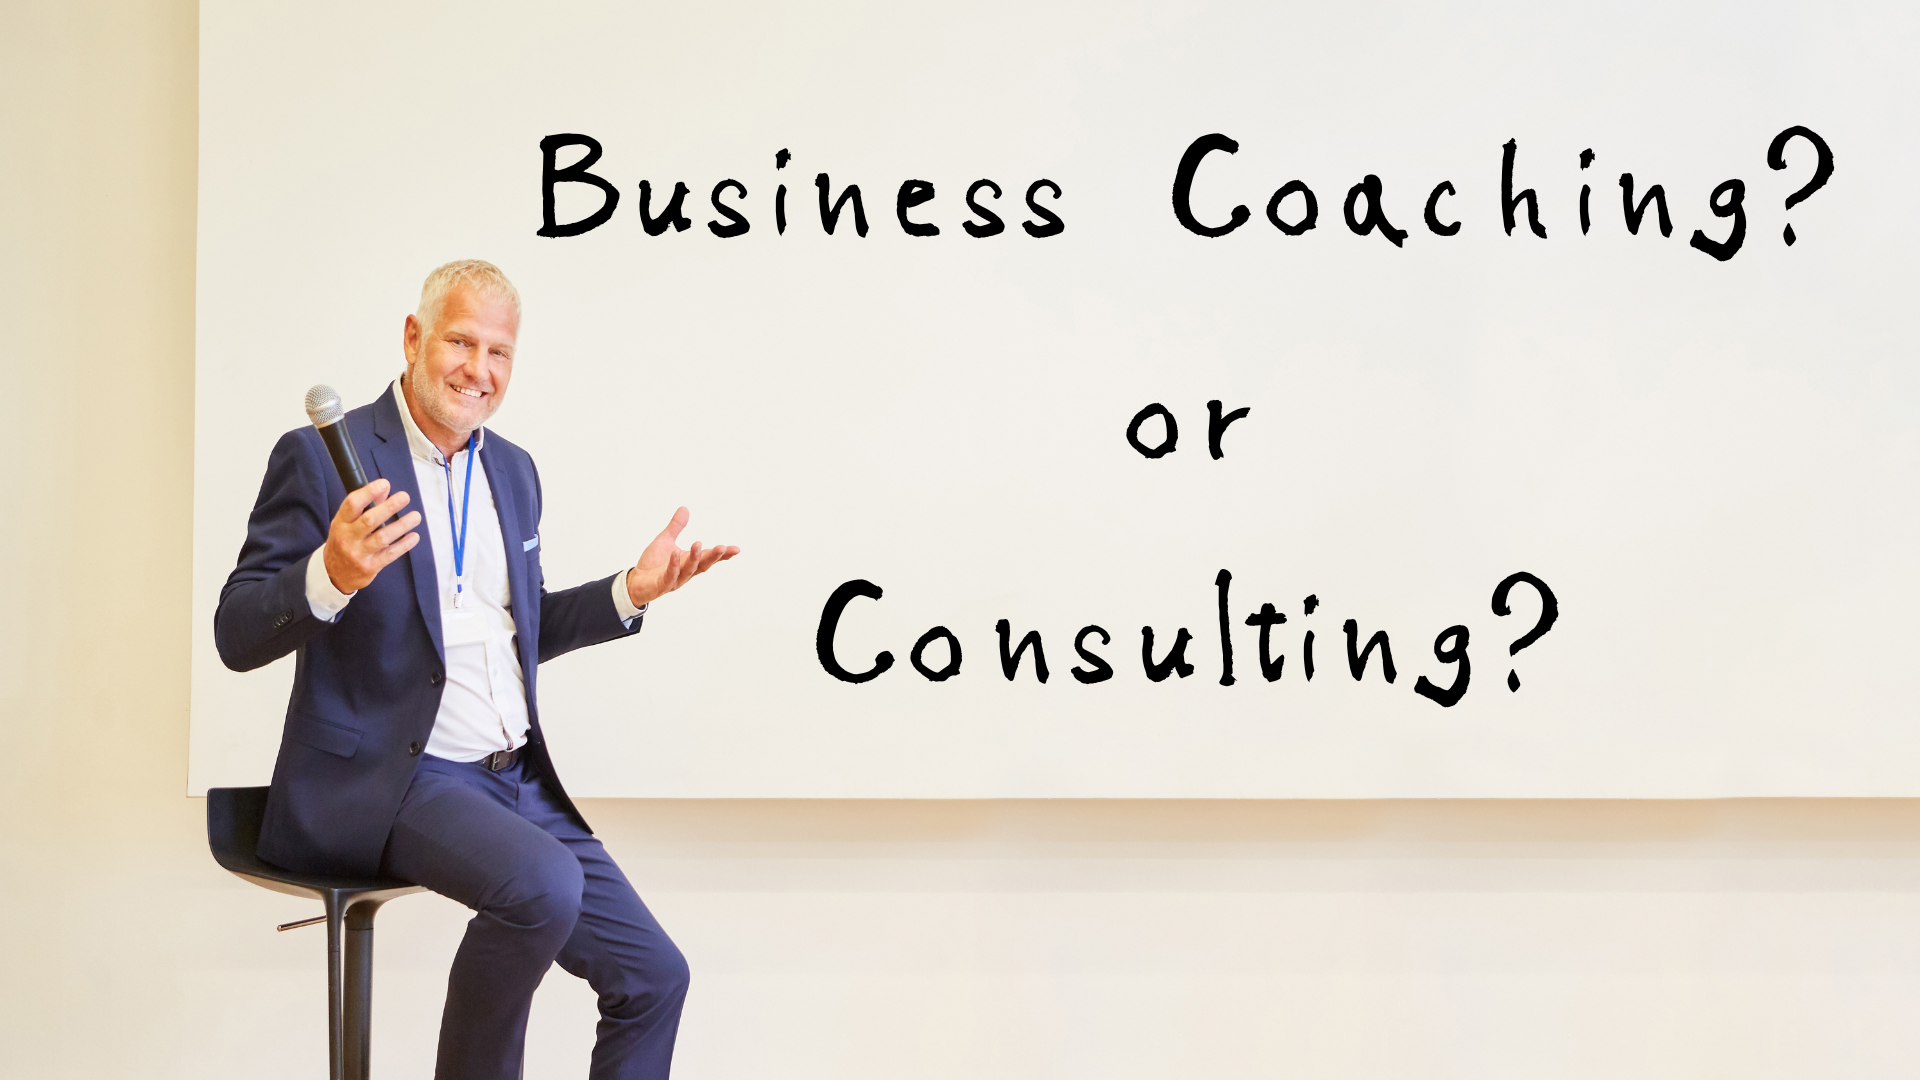 Business Coaching or Consulting